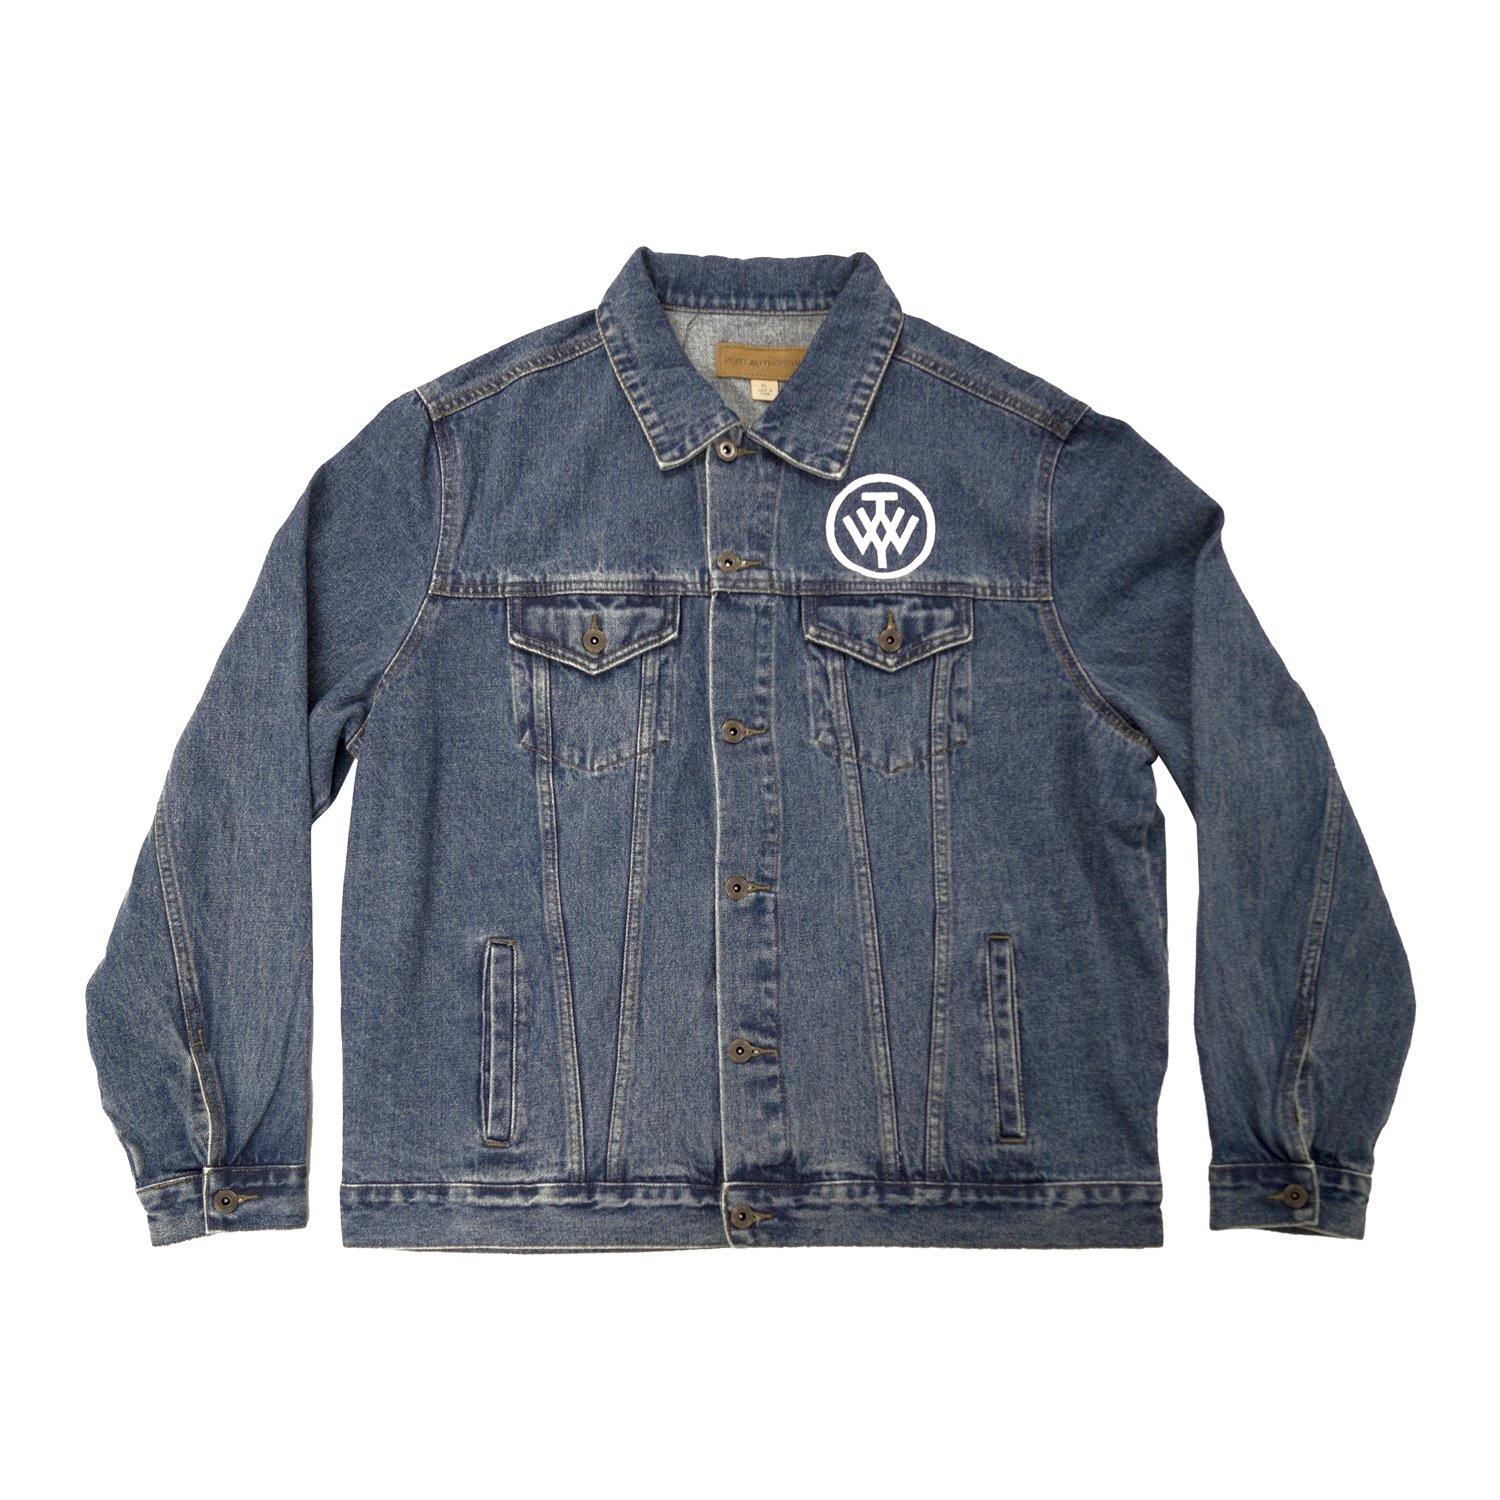 Buy Distressed Denim Jacket Men's Outerwear from SMOKE RISE. Find SMOKE  RISE fashion & more at DrJays.com